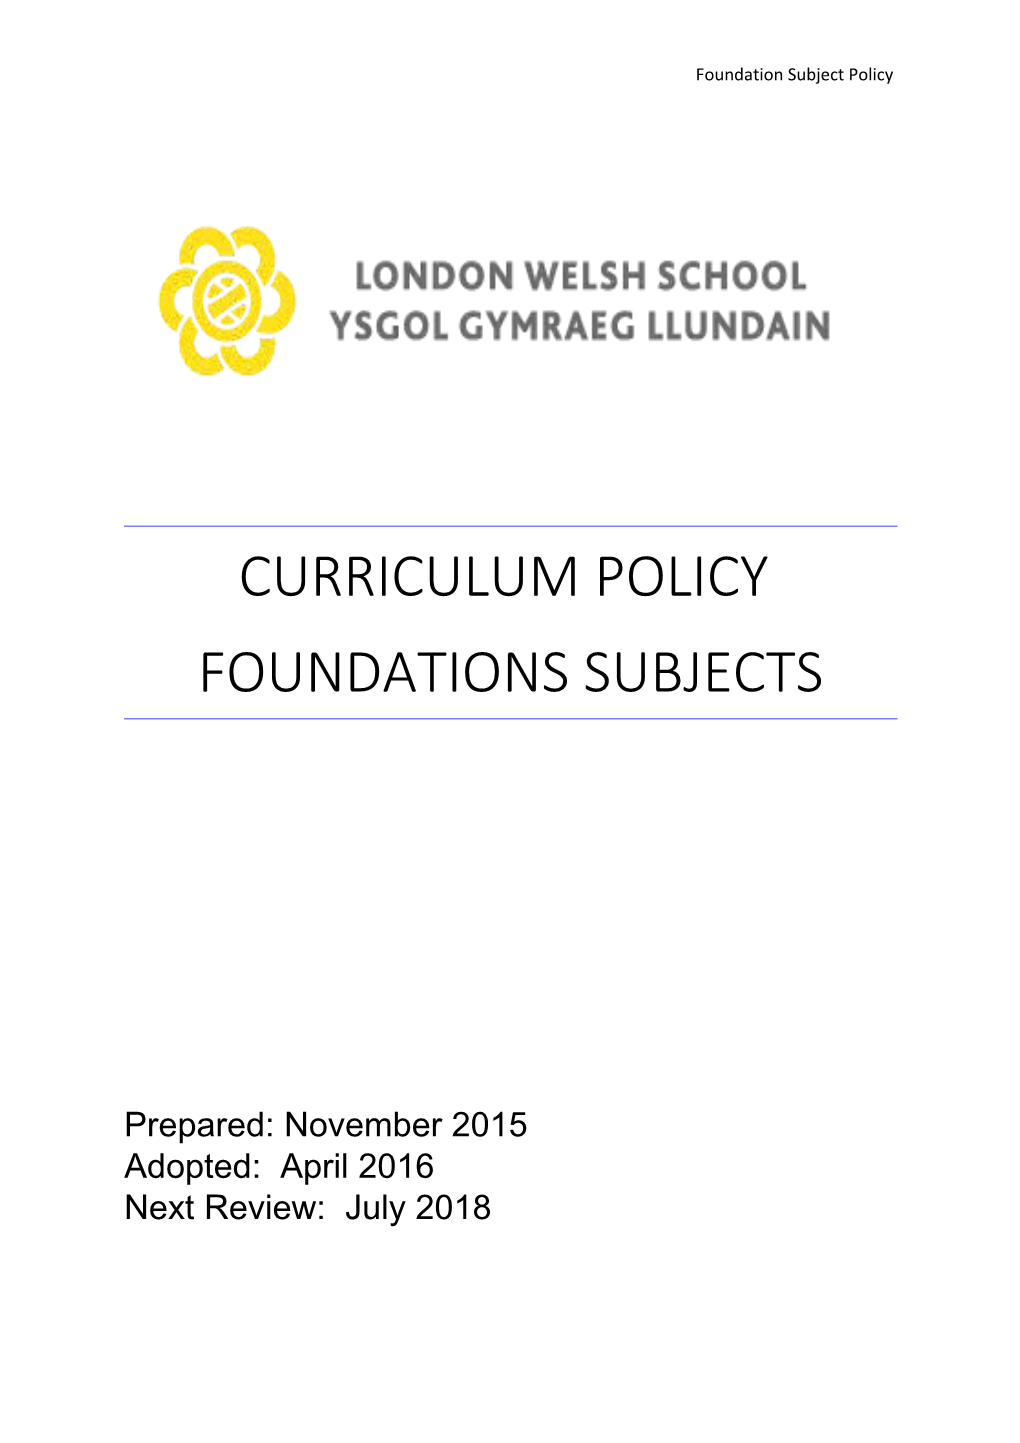 Foundation Subject Policy